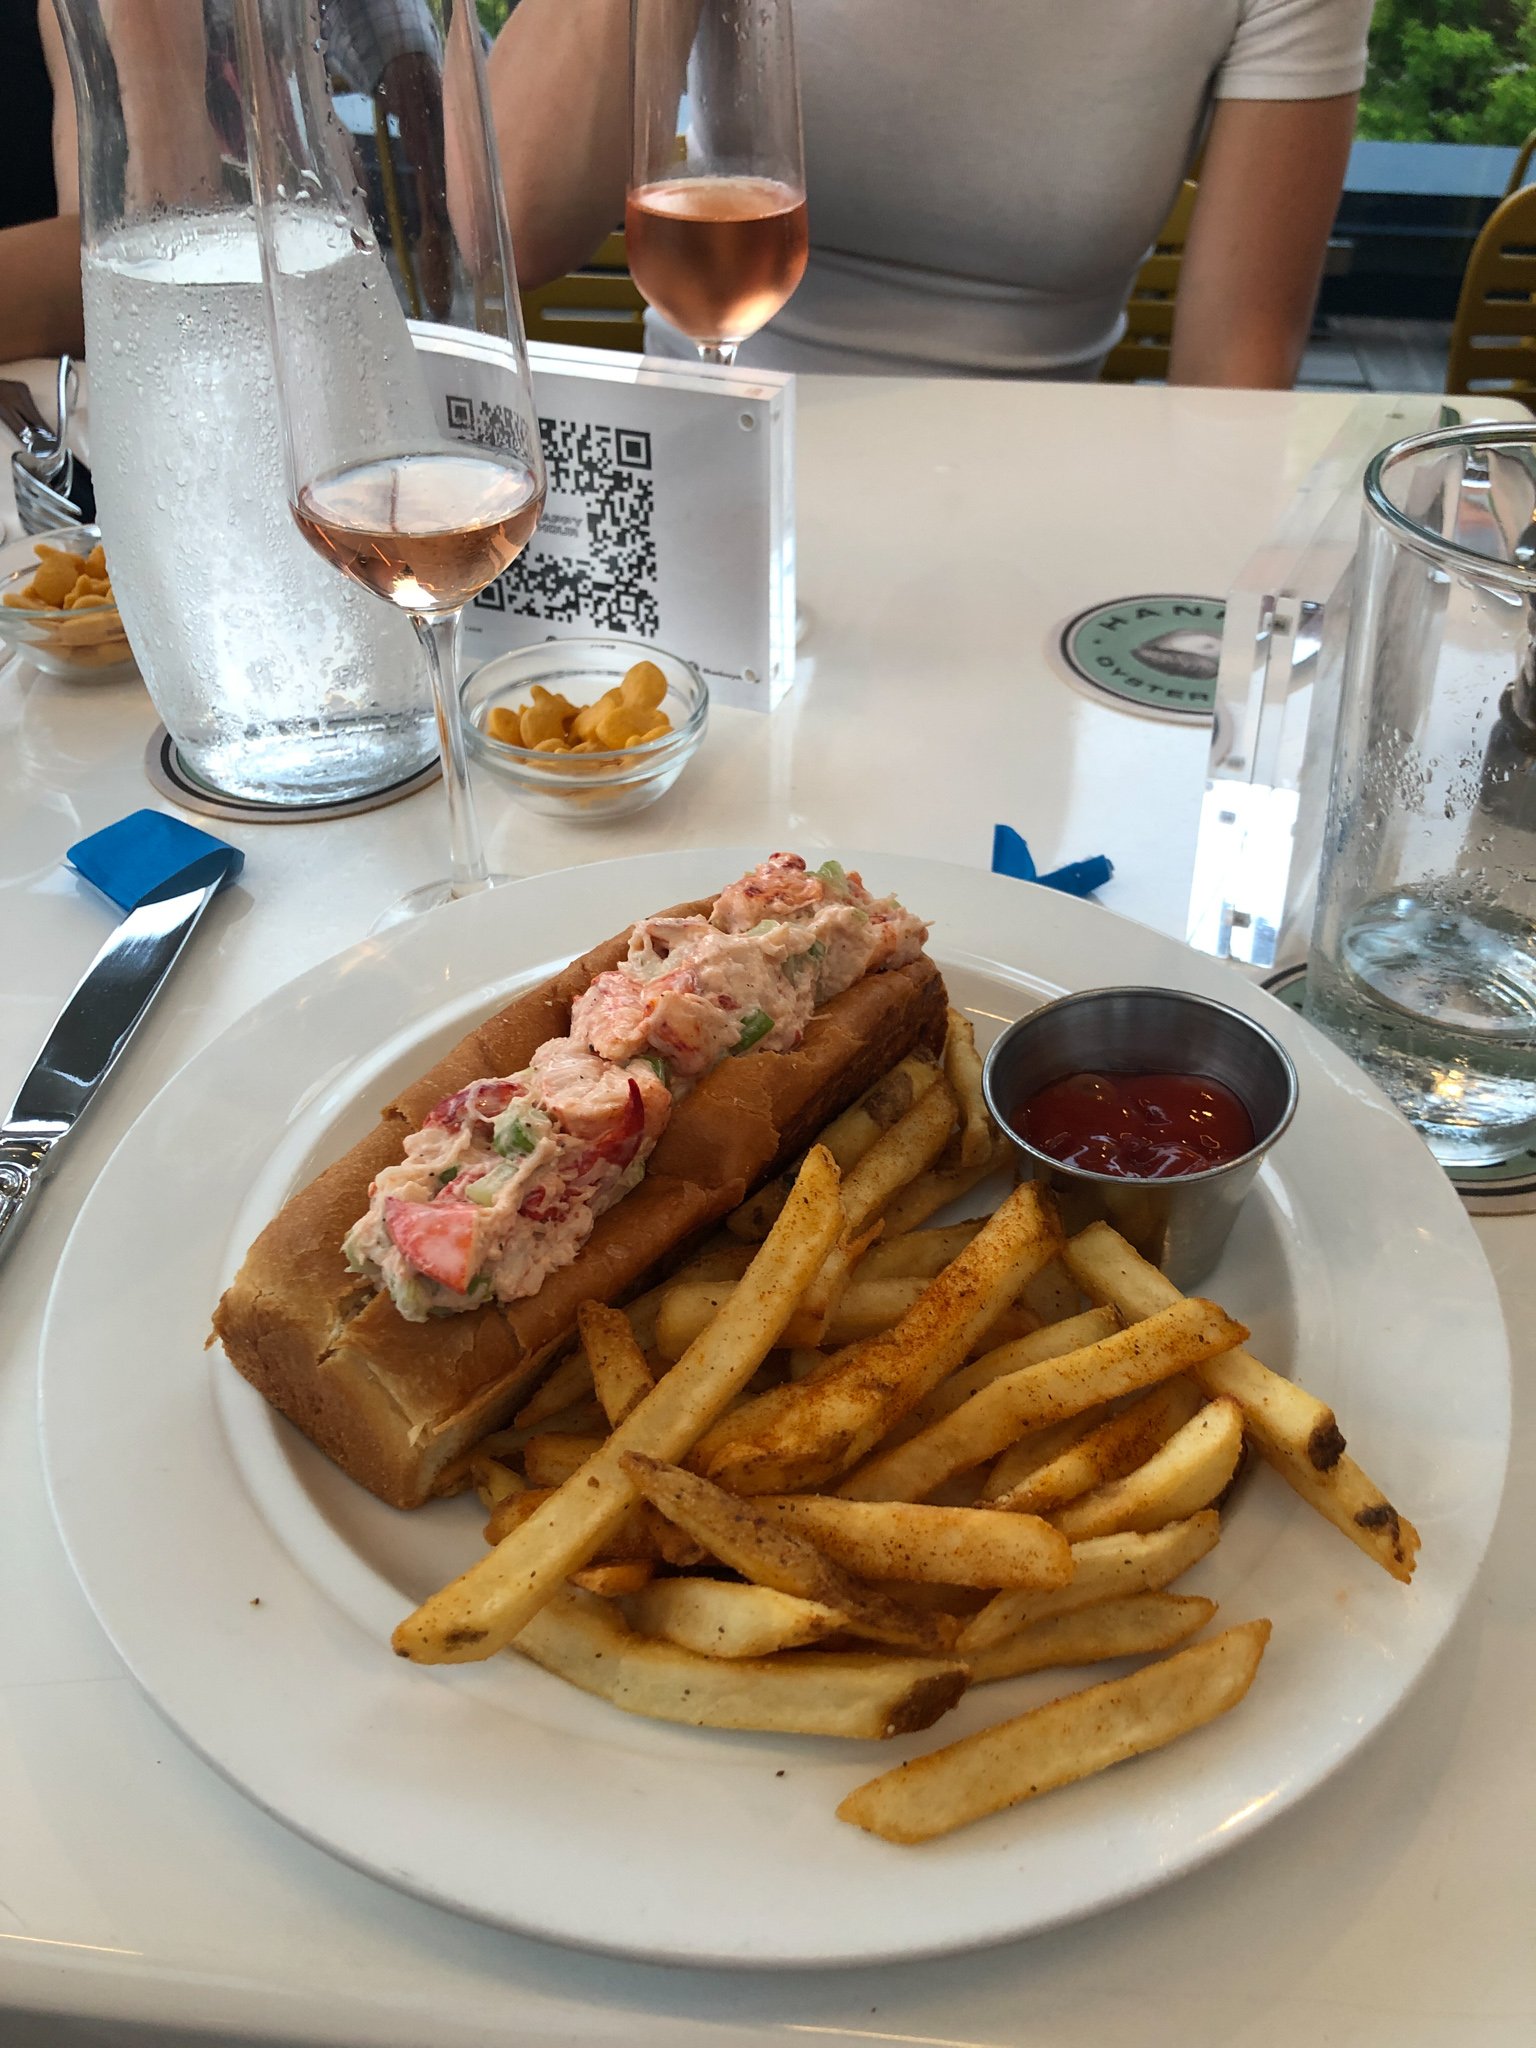 lobster roll on a plate with french fries.